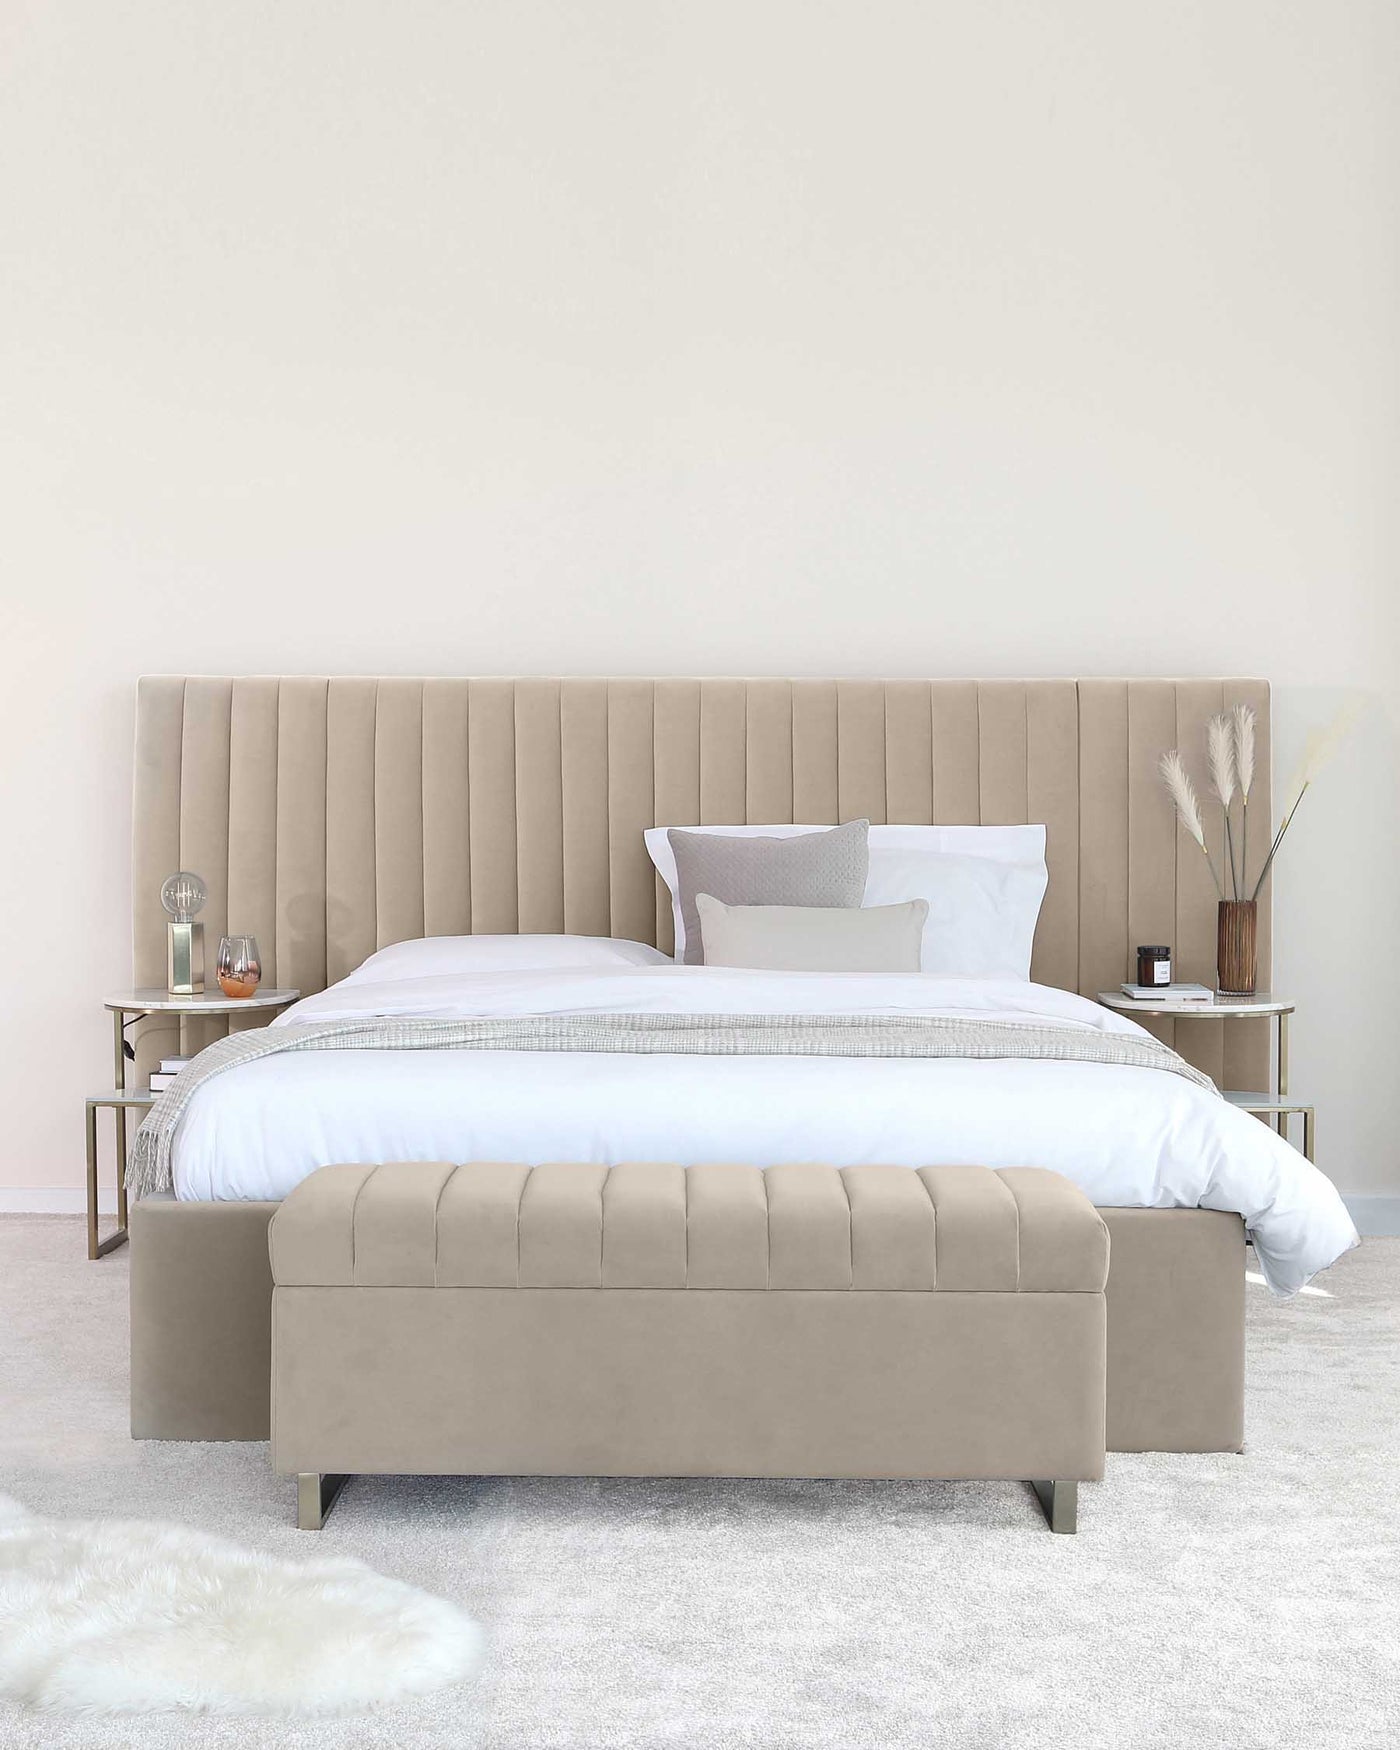 Elegant bedroom furniture featuring a large upholstered bed with a plush, tufted headboard and matching bench at the foot. The bed is dressed in crisp white bedding with a textured throw and a single decorative pillow. Flanking the bed are two modern, minimalistic nightstands with metal frames holding lamps and decorative items. The neutral colour palette creates a serene and sophisticated atmosphere.